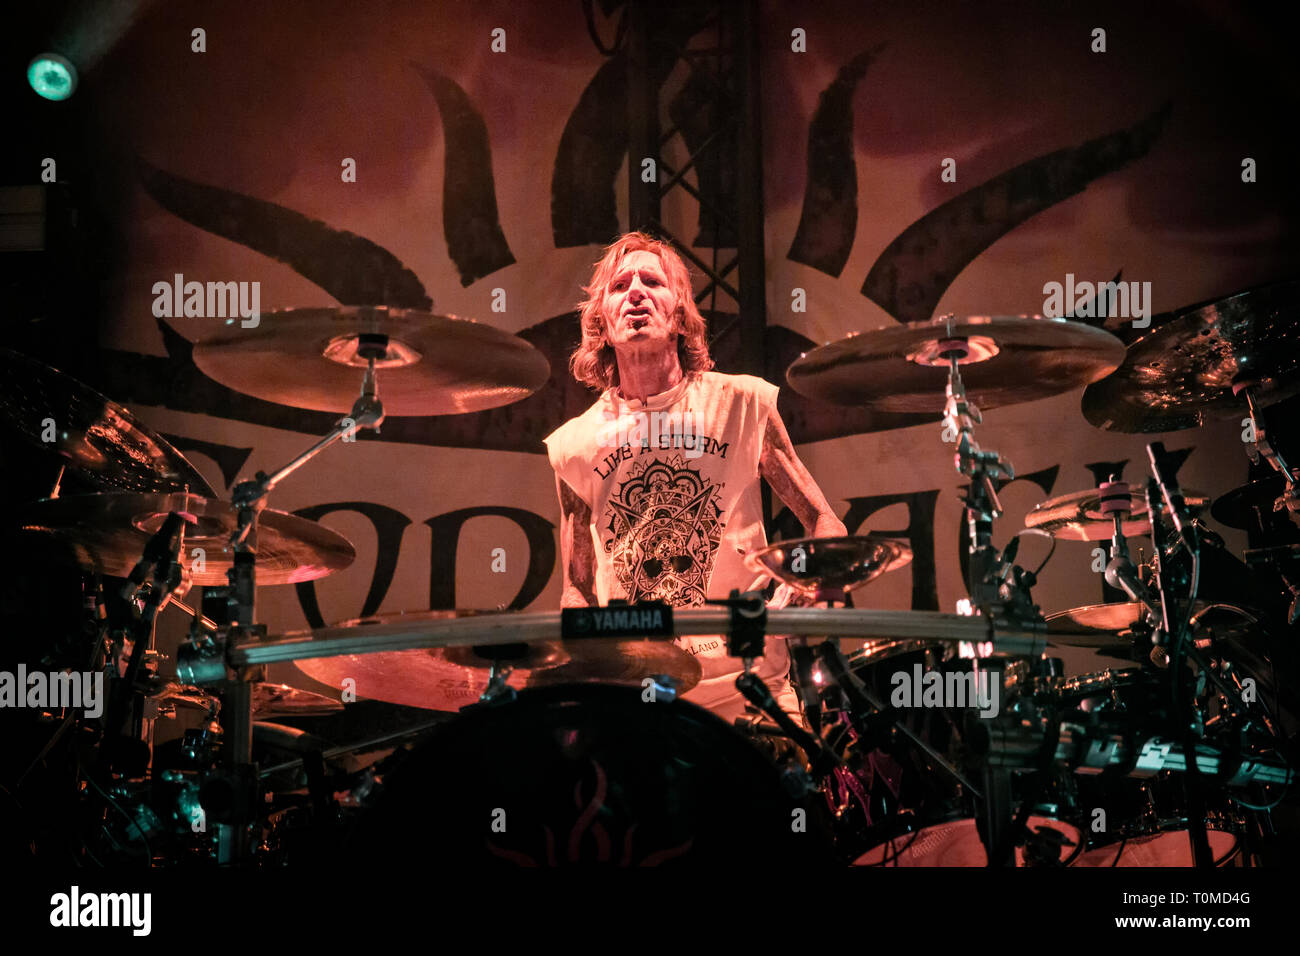 Norway, Oslo - March 17, 2019. The American rock band Godsmack performs a live concert at Oslo Spektrum in Oslo. Here drummer Shannon Larkin is seen live on stage. (Photo credit: Gonzales Photo - Terje Dokken). Stock Photo